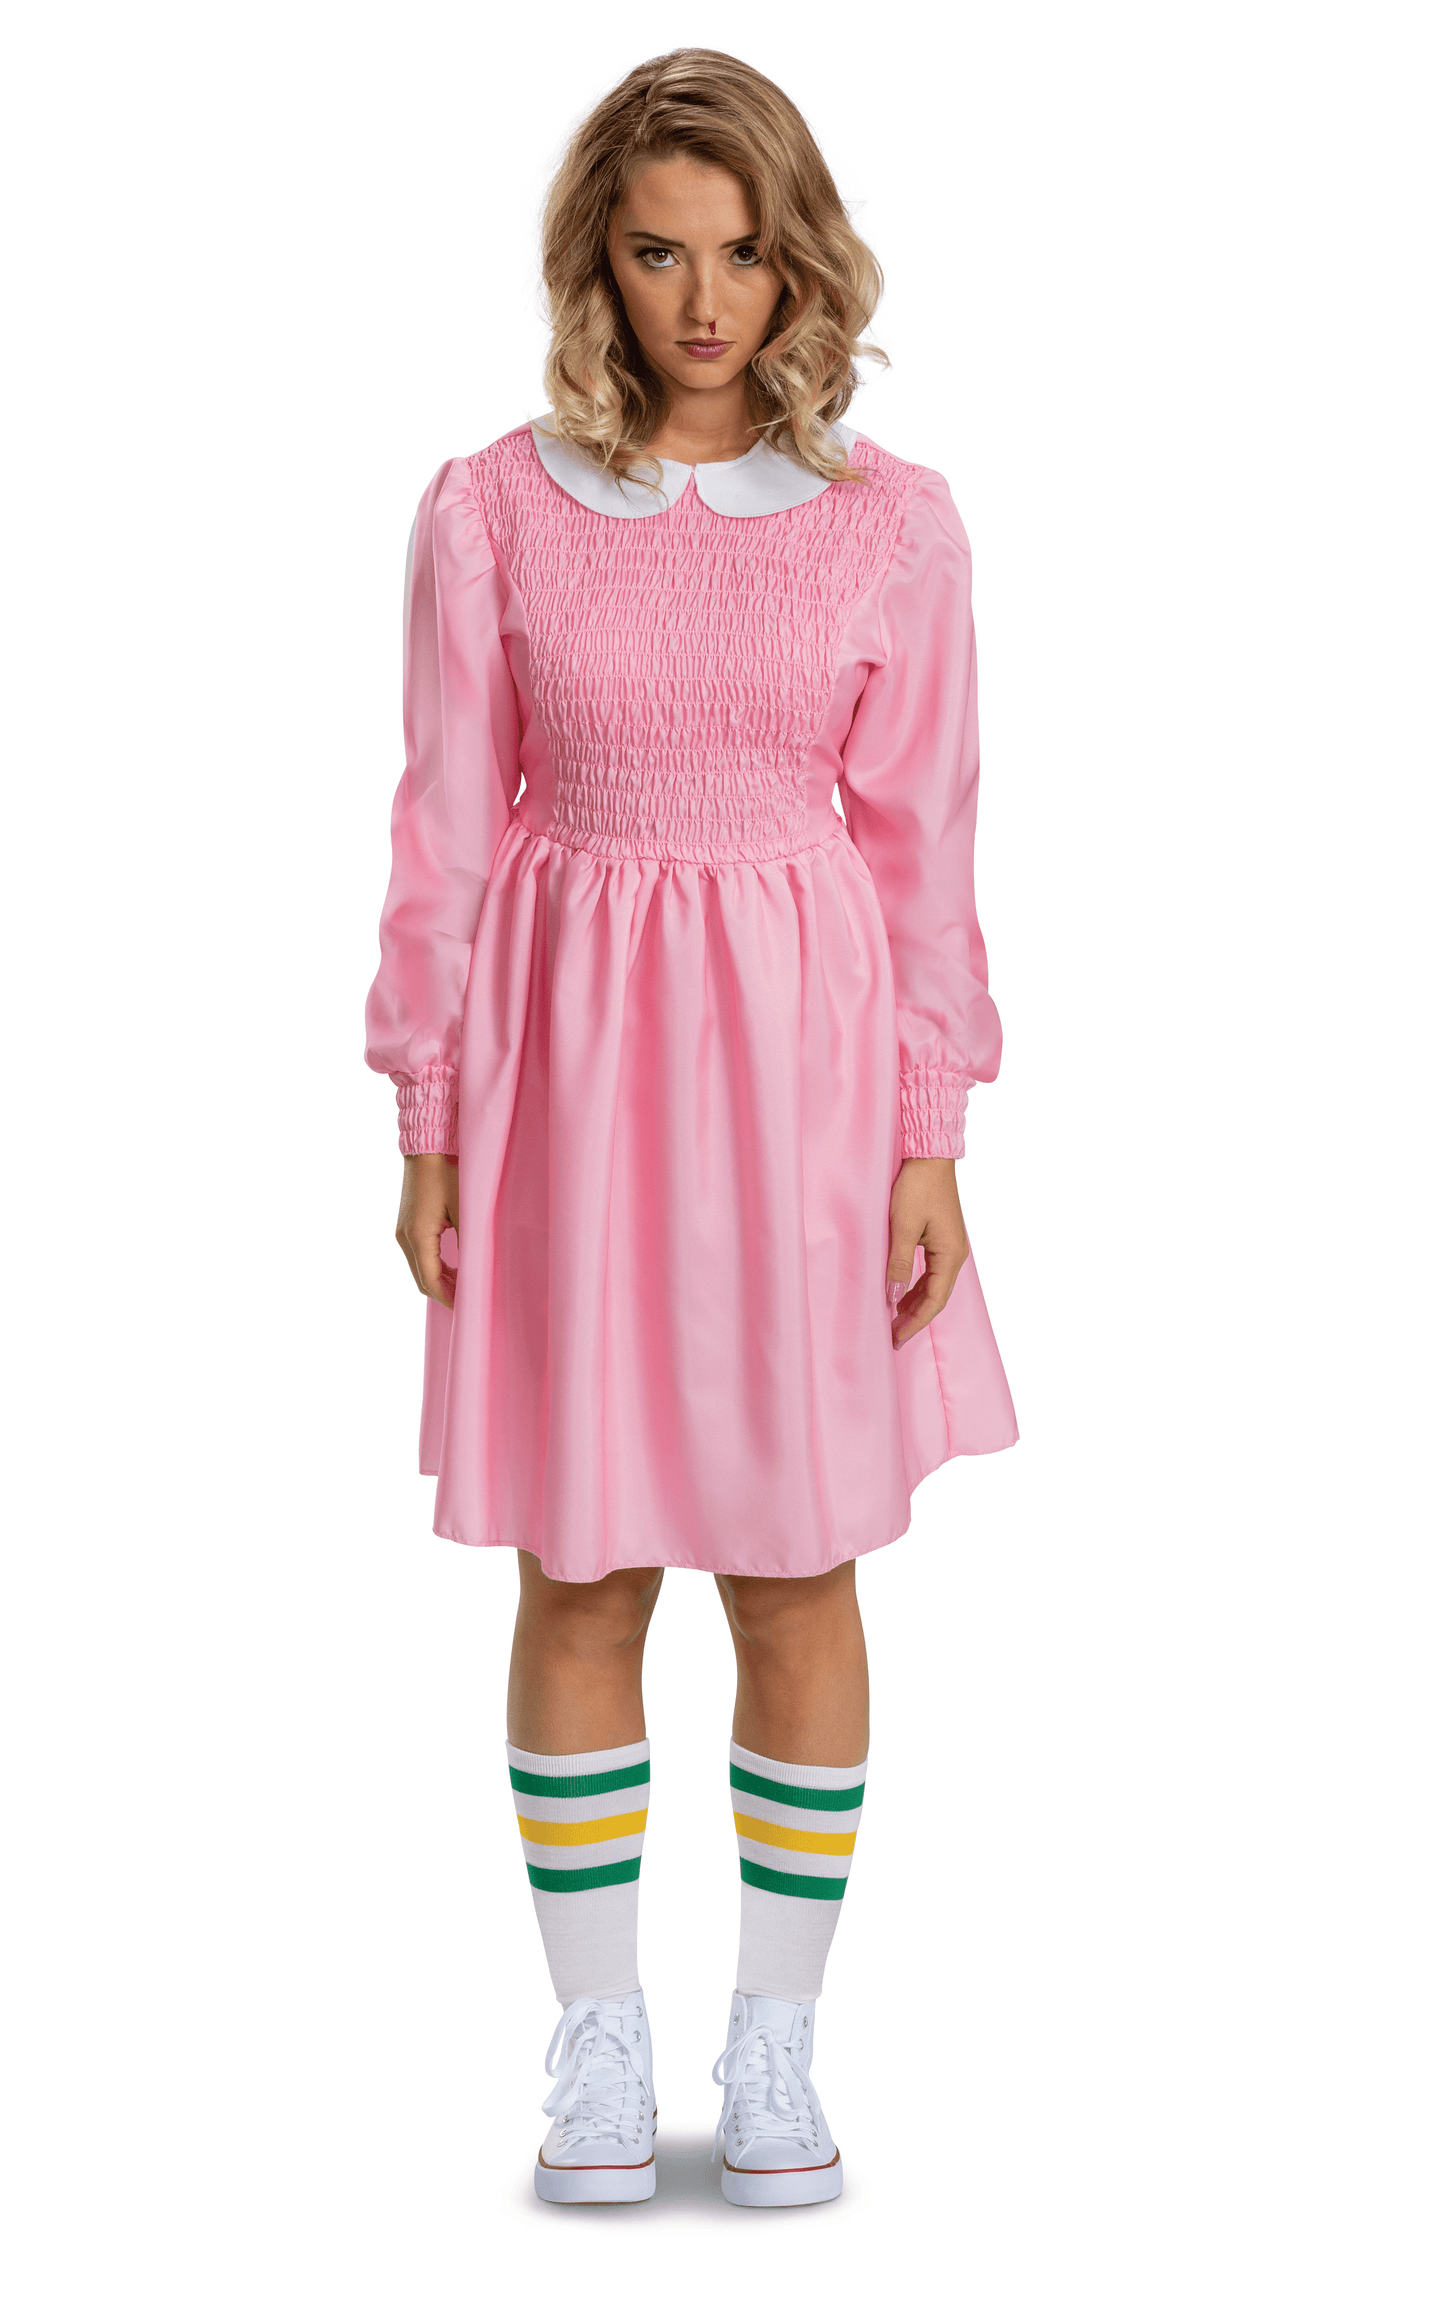 Adult Eleven Classic Pink Dress Costume - Stranger Things - McCabe's Costumes